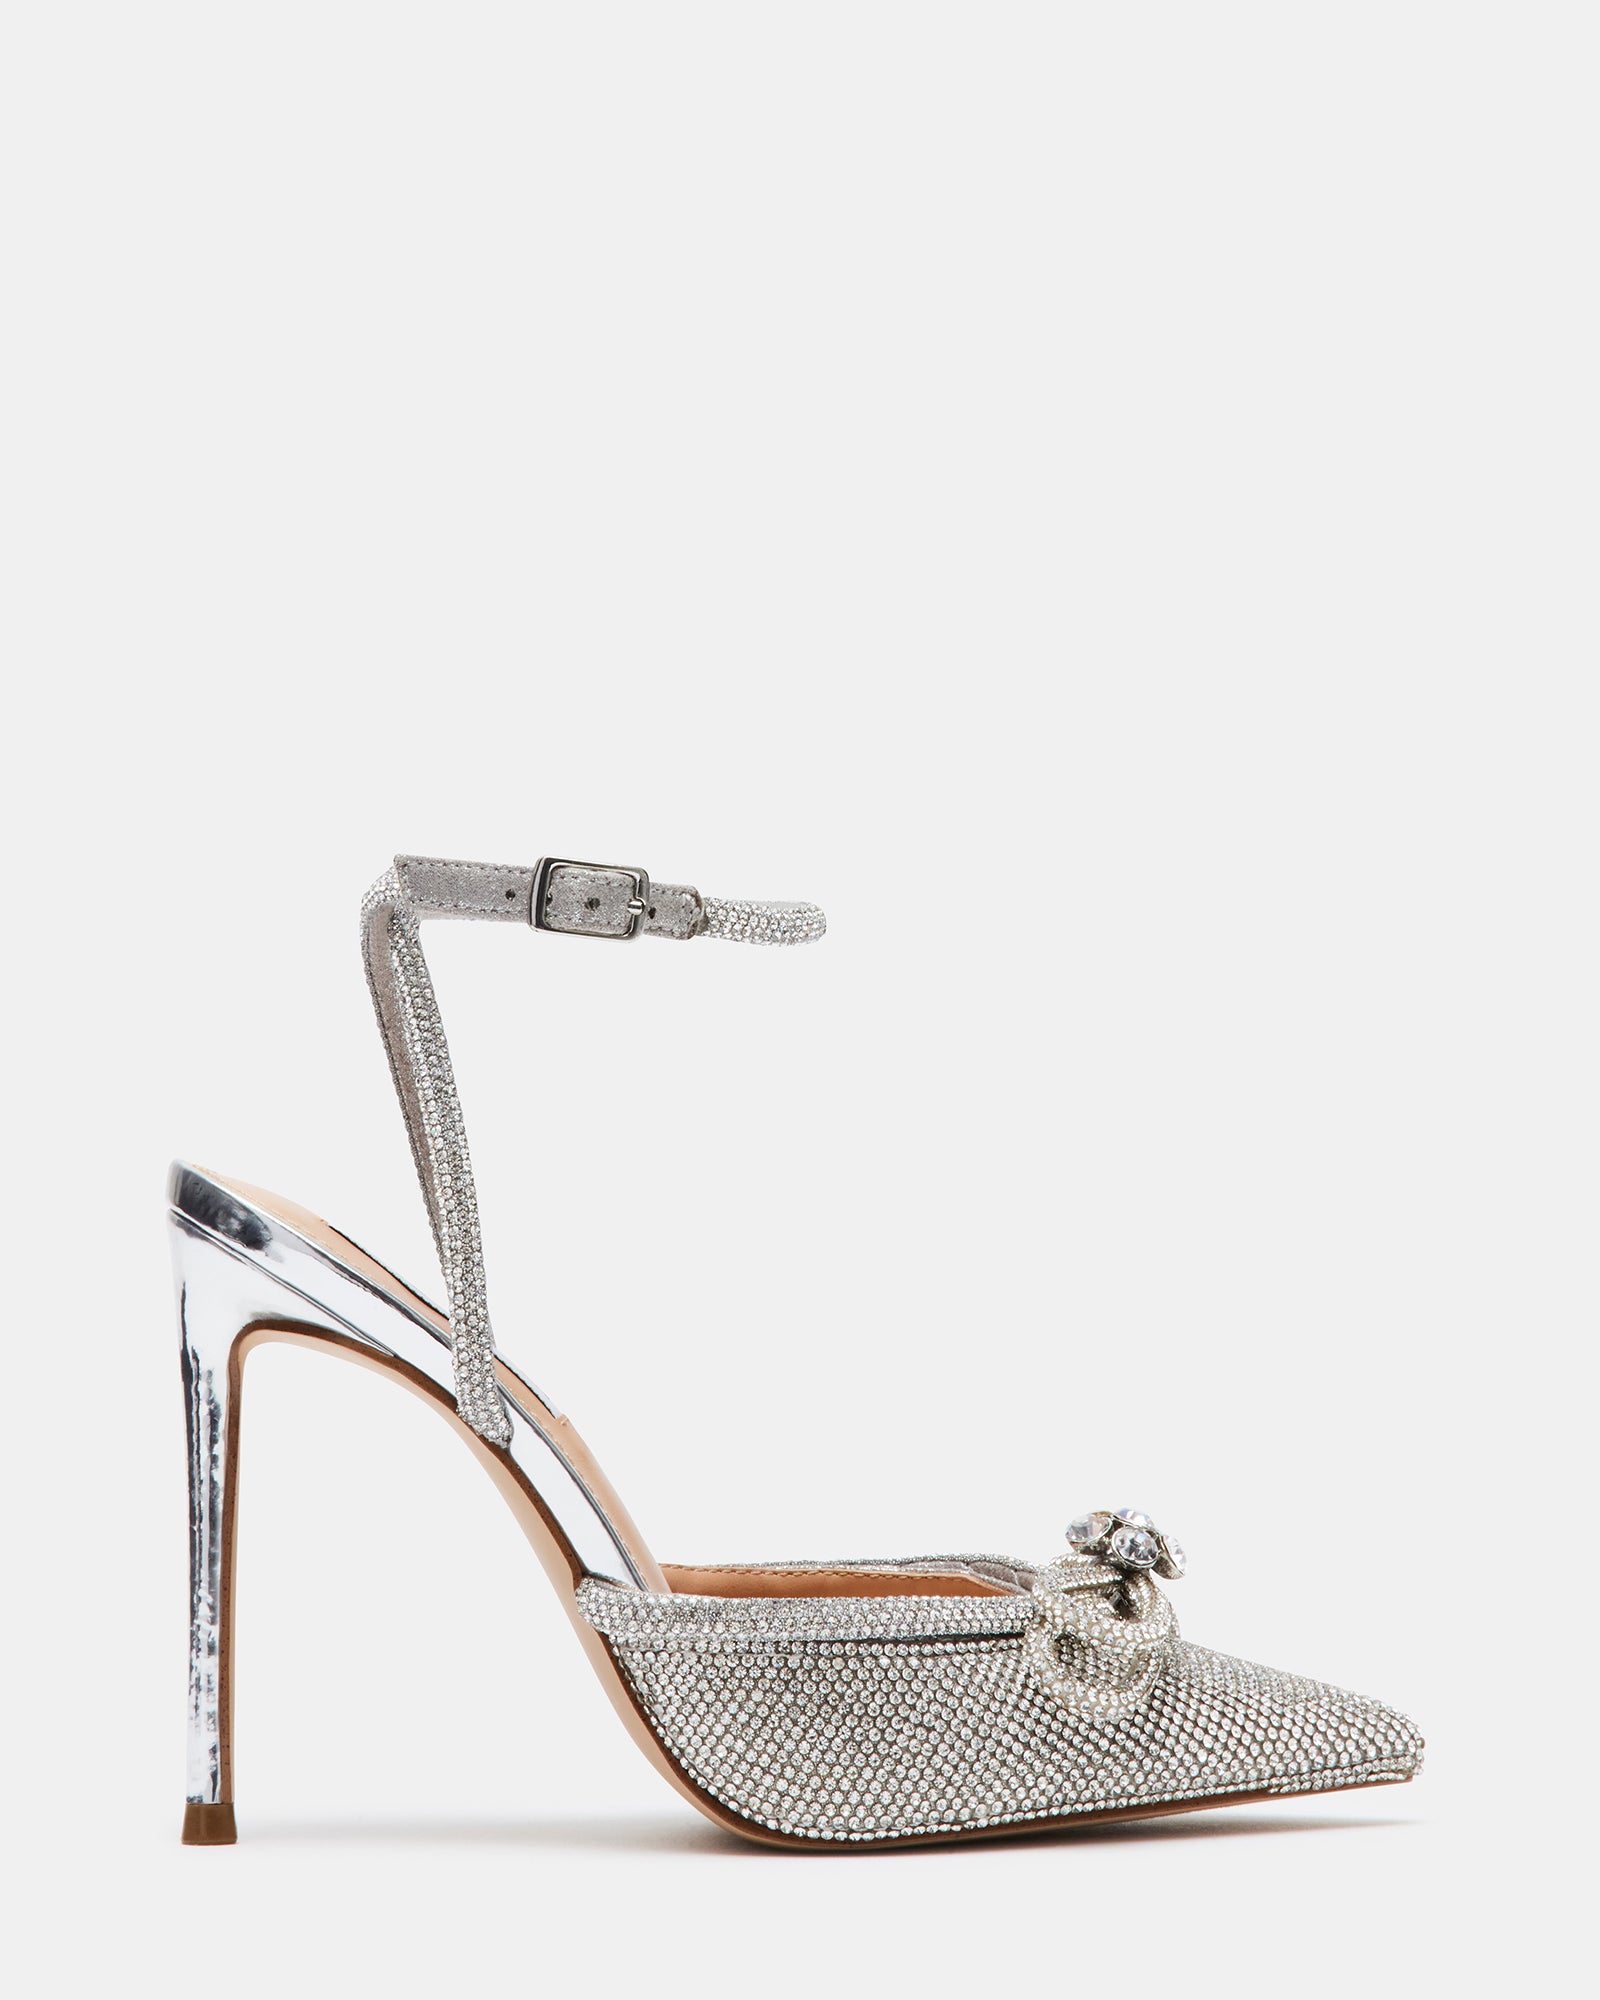  Carcuume Slingback Heels for Women,Two Tone Shoes,Sexy